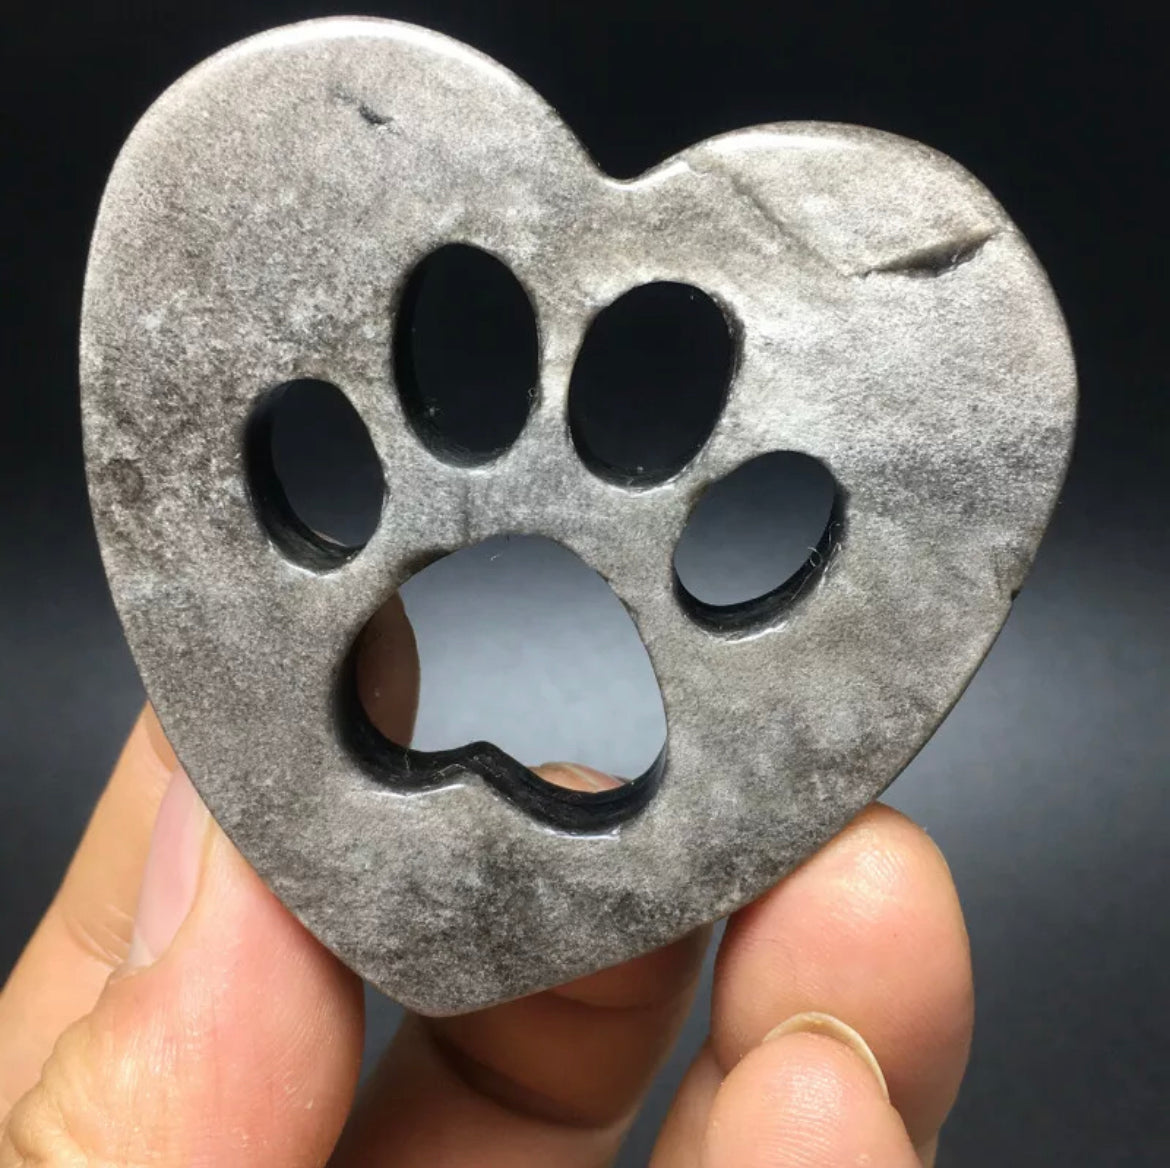 Silver Obsidian Heart with carved out paw